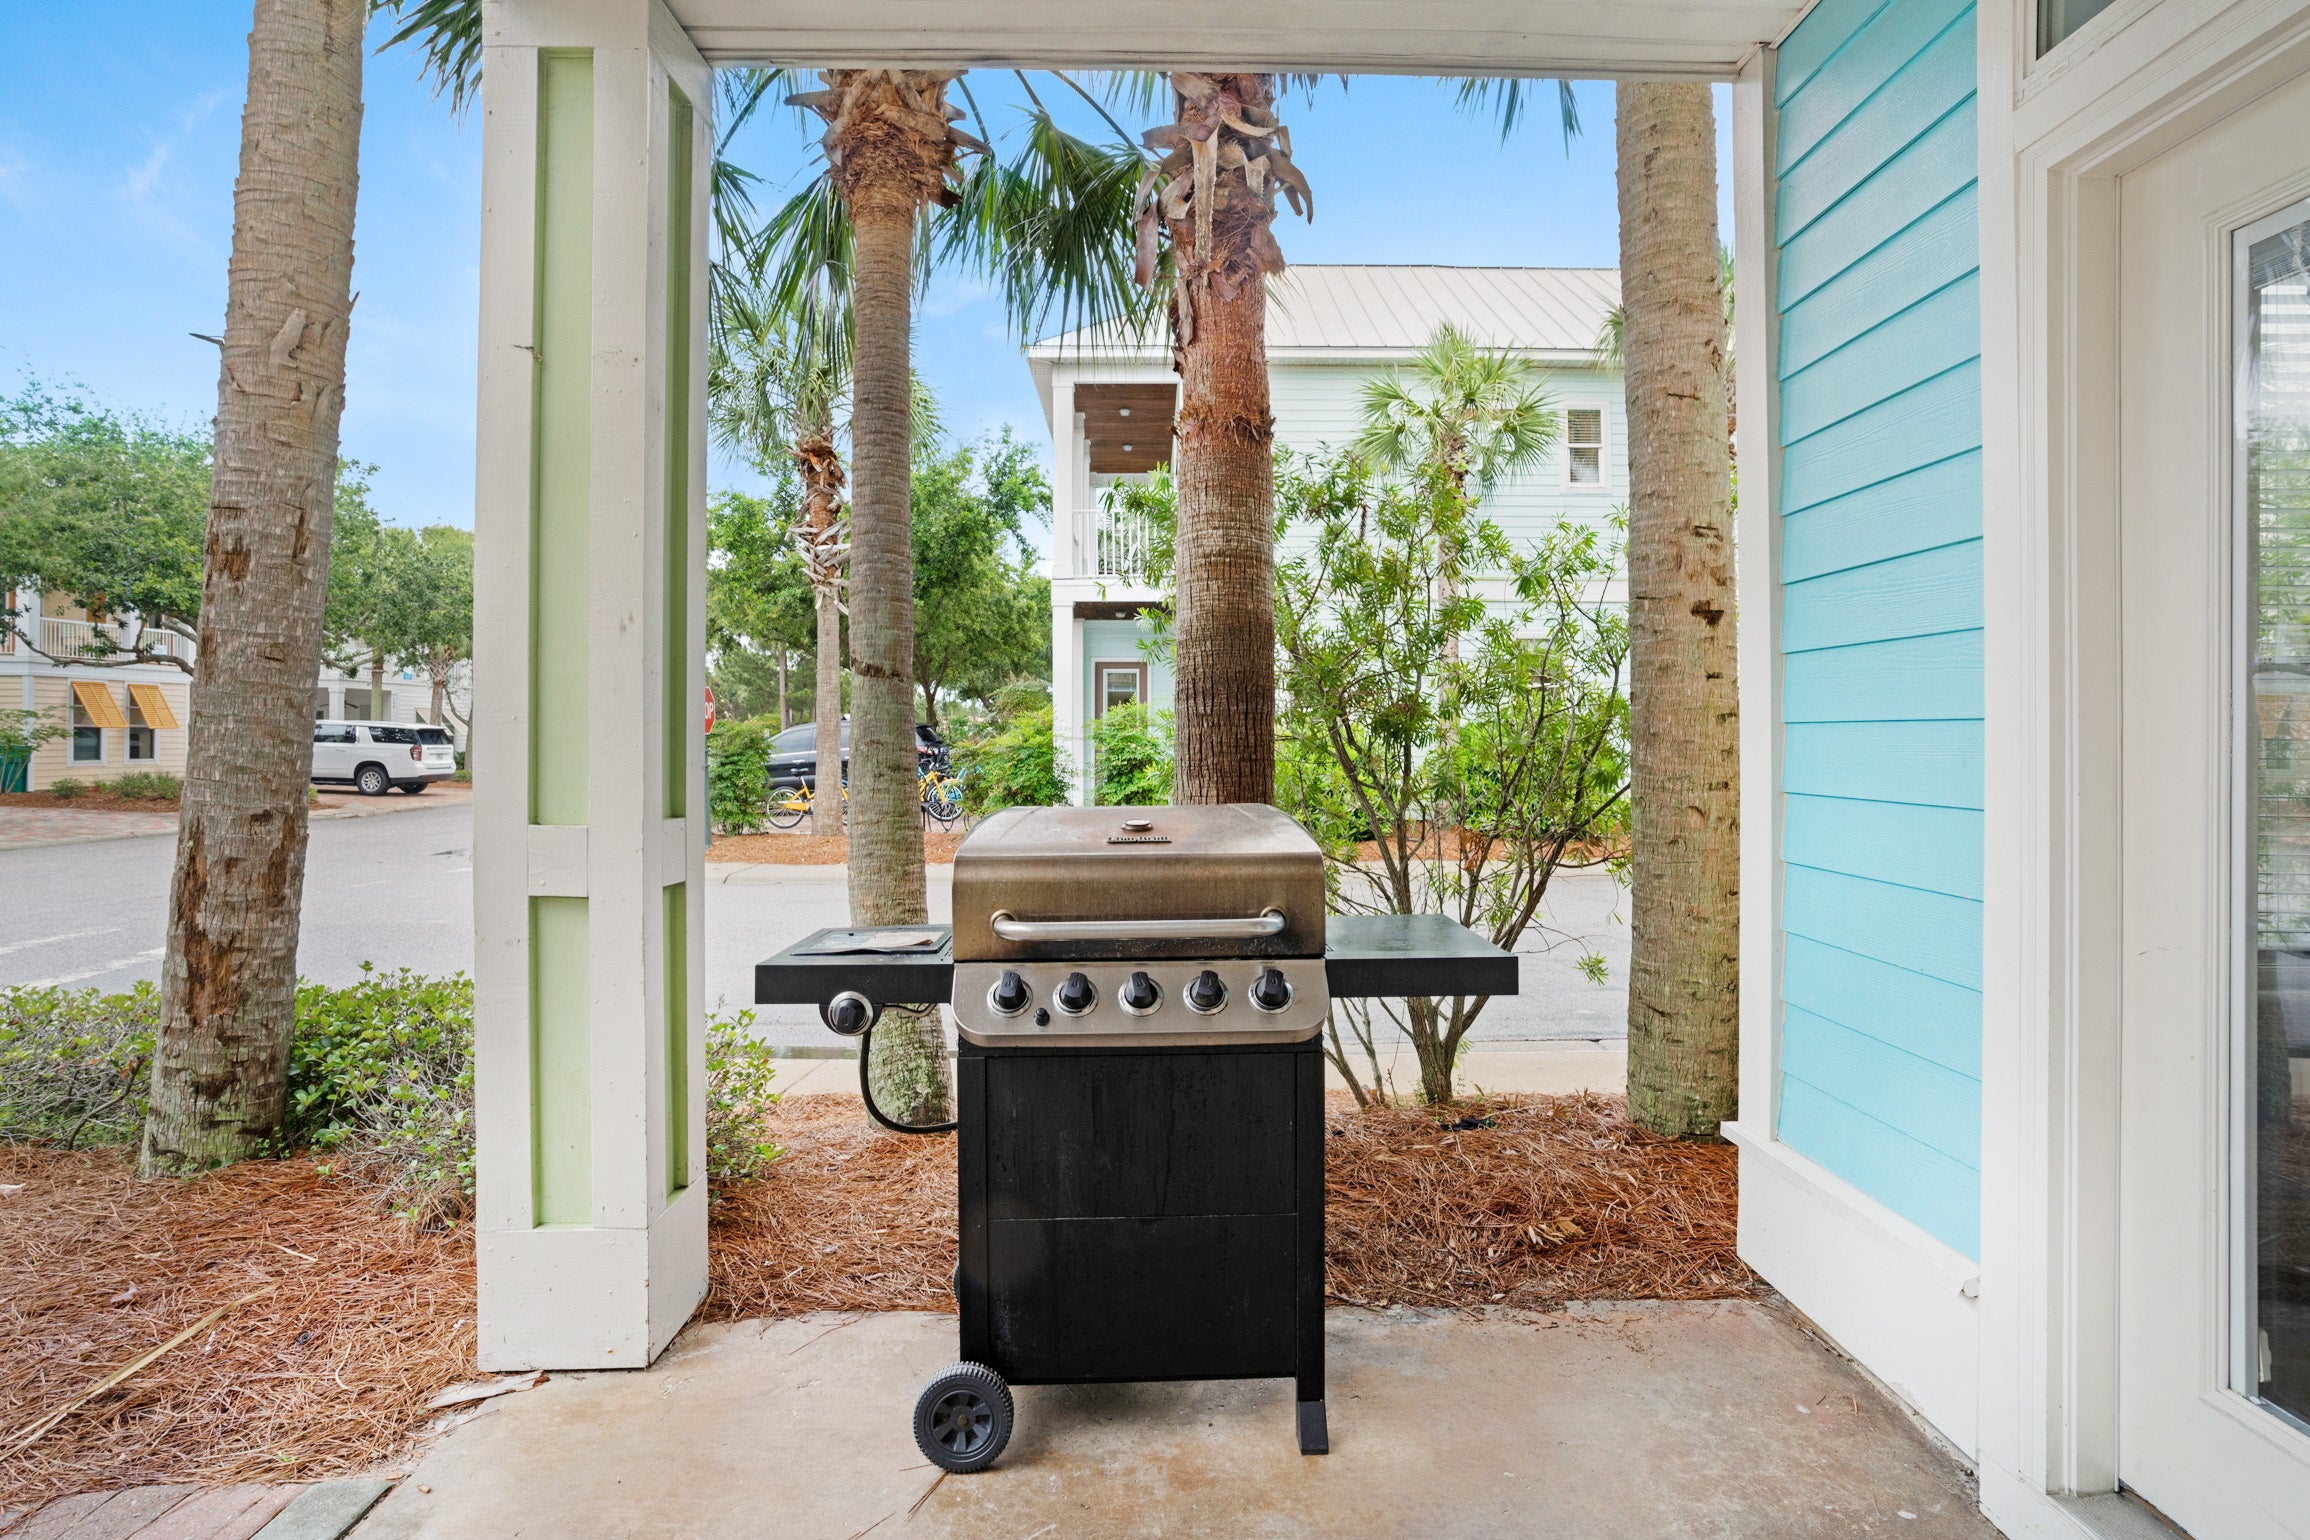 Grill on the front porch